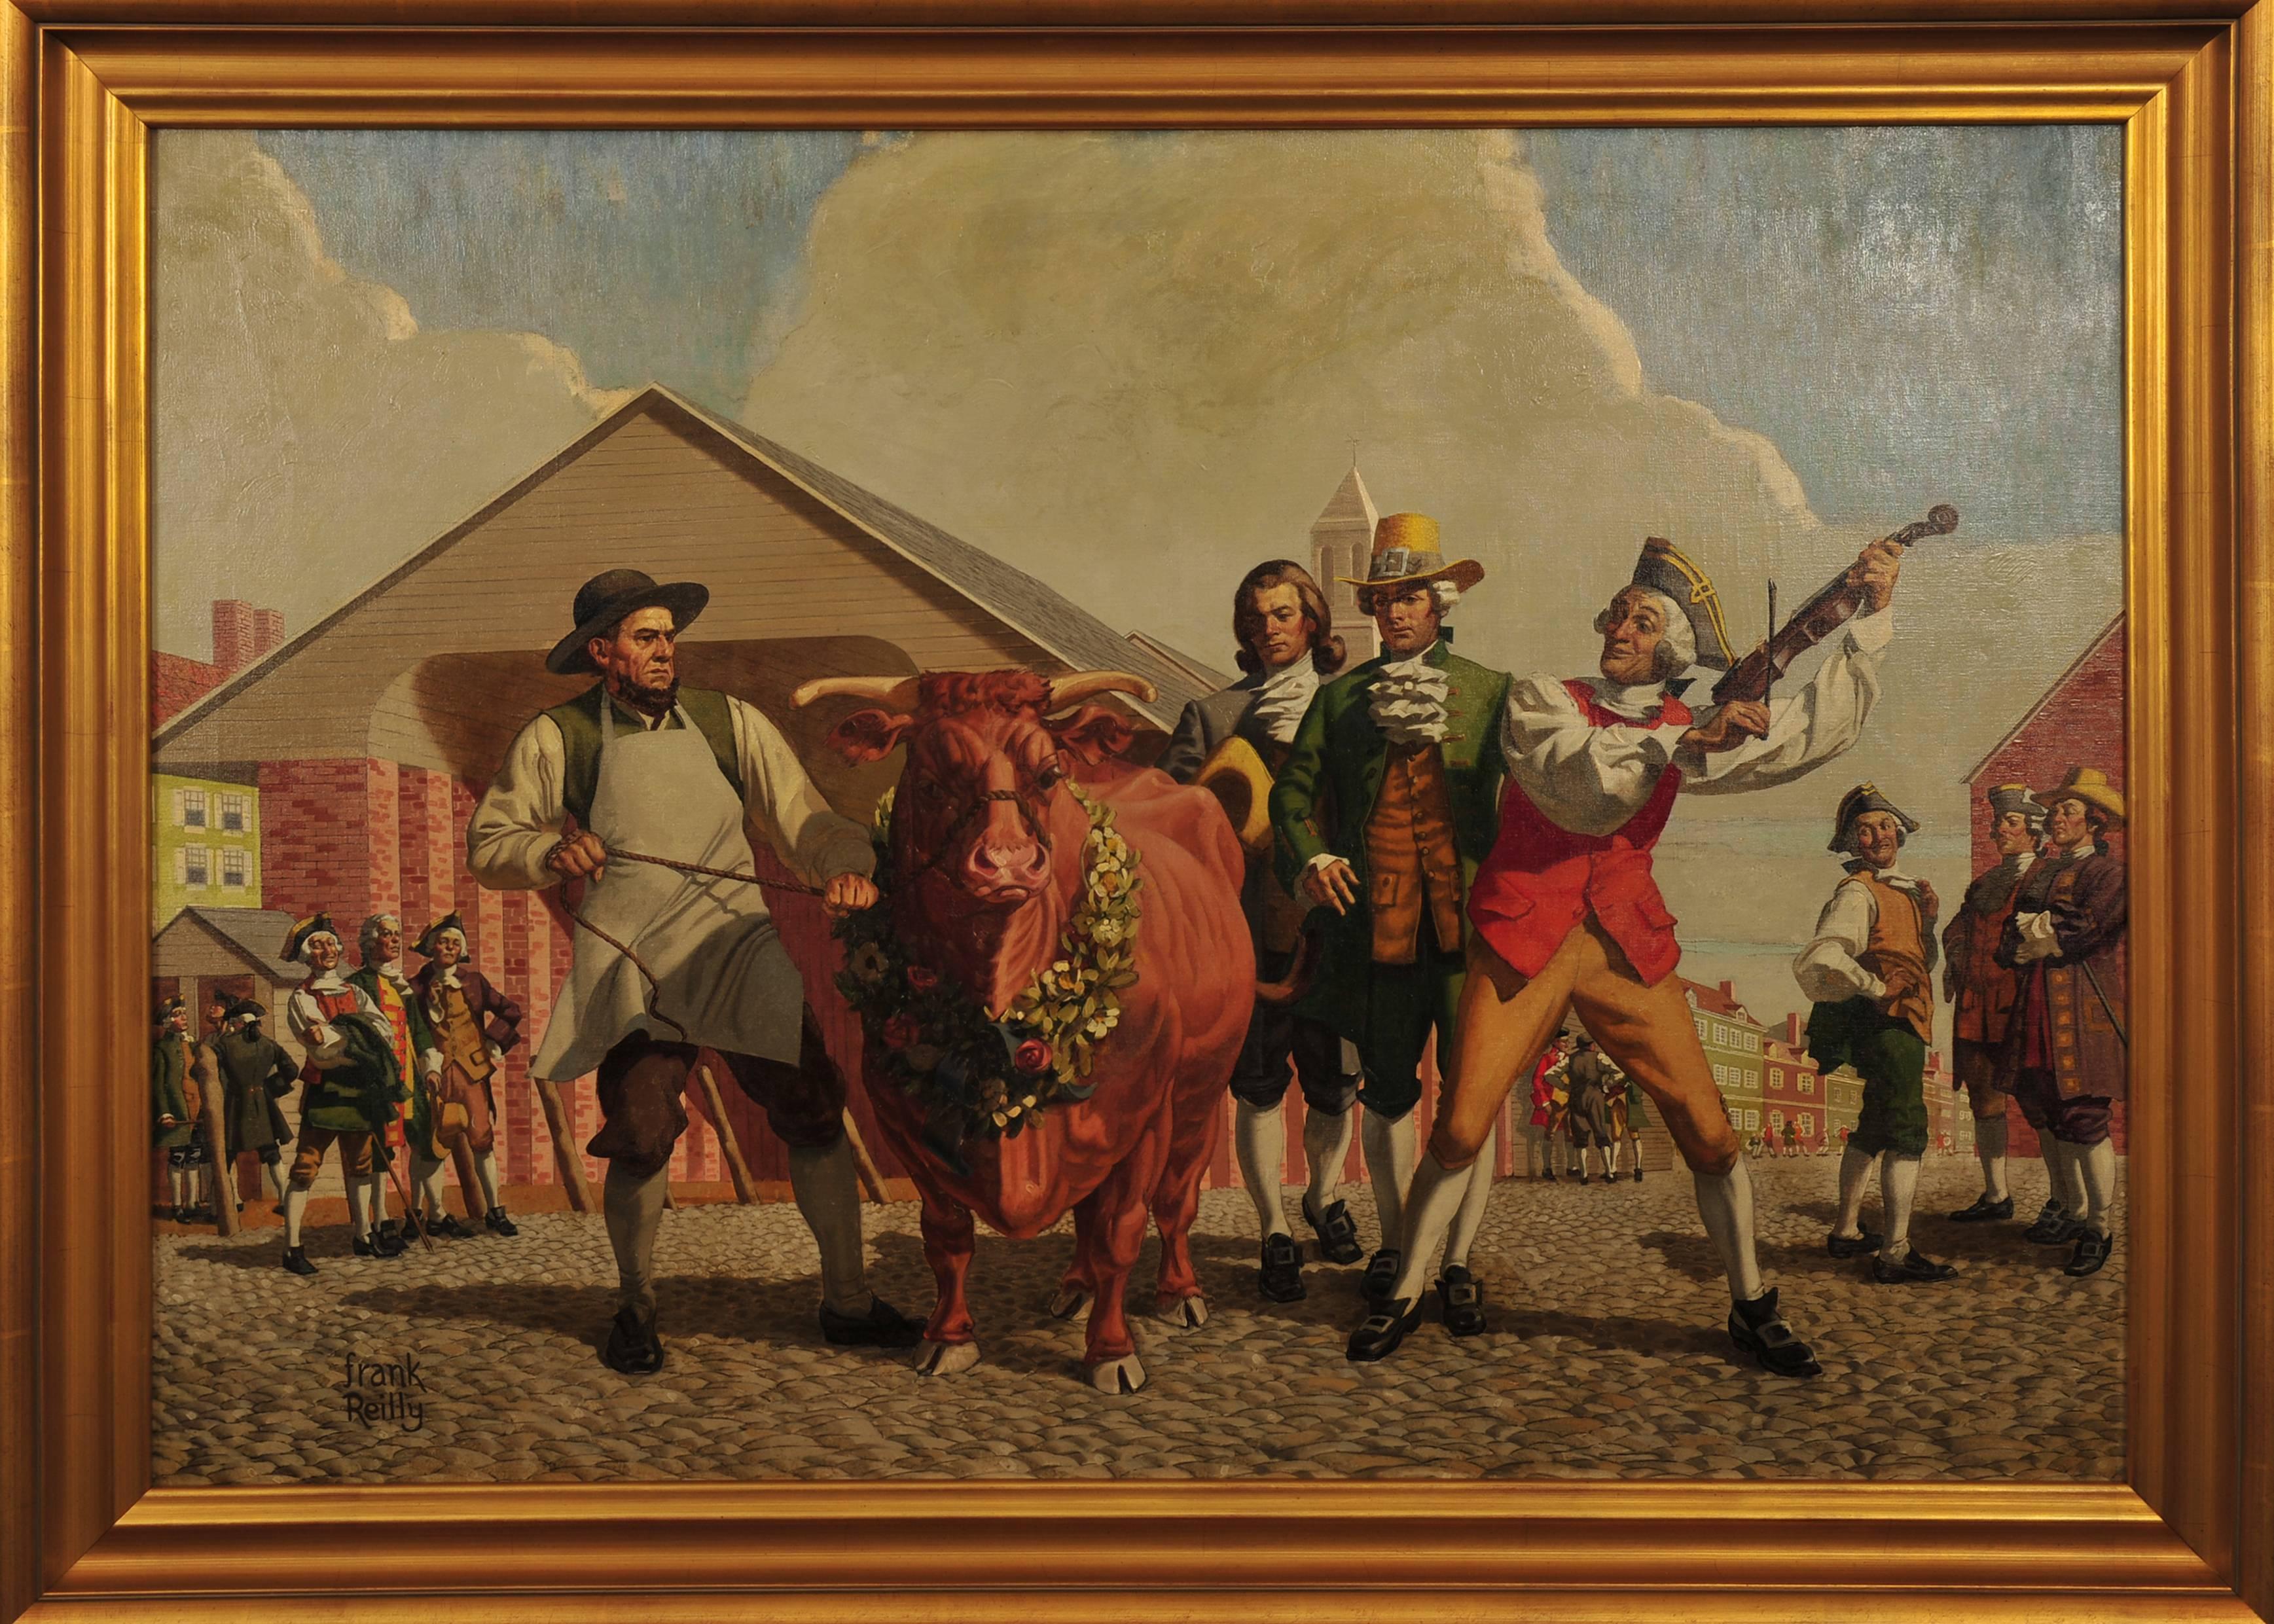 Colonists and Prize Bull - Painting by Frank J. Reilly